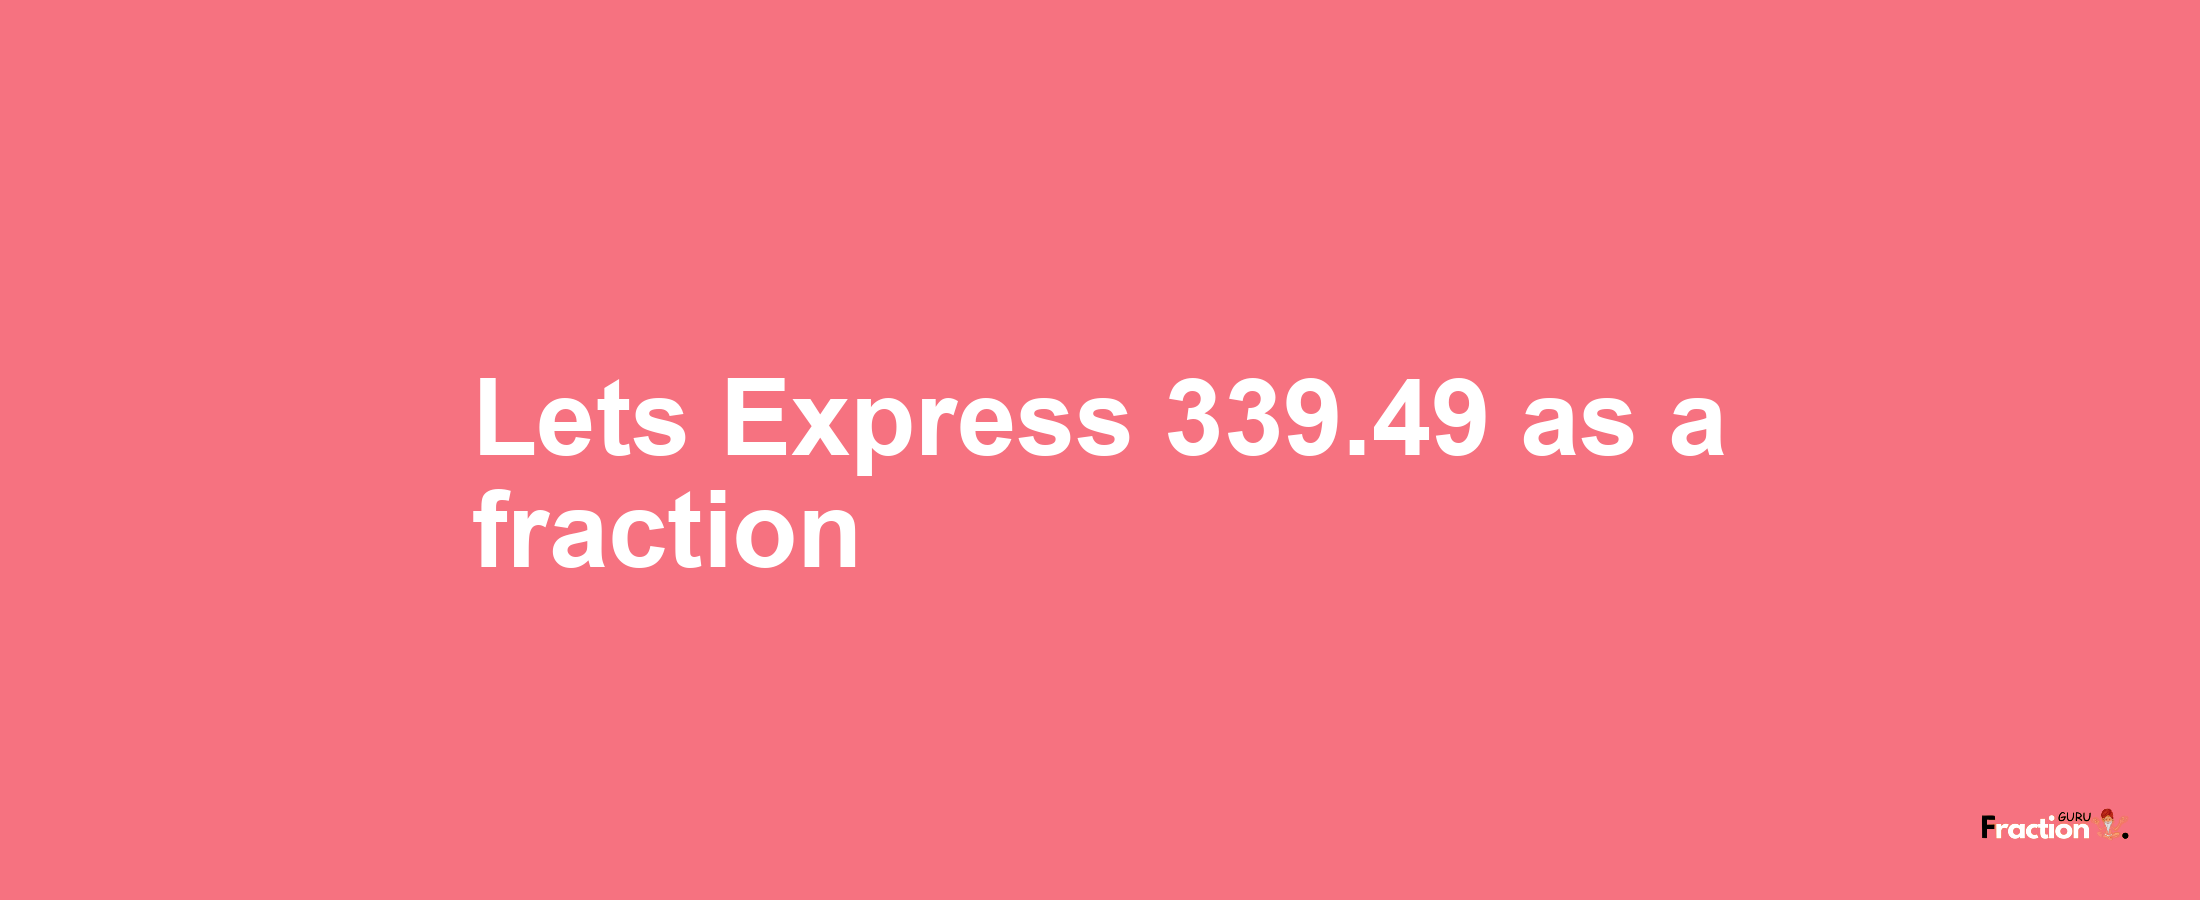 Lets Express 339.49 as afraction